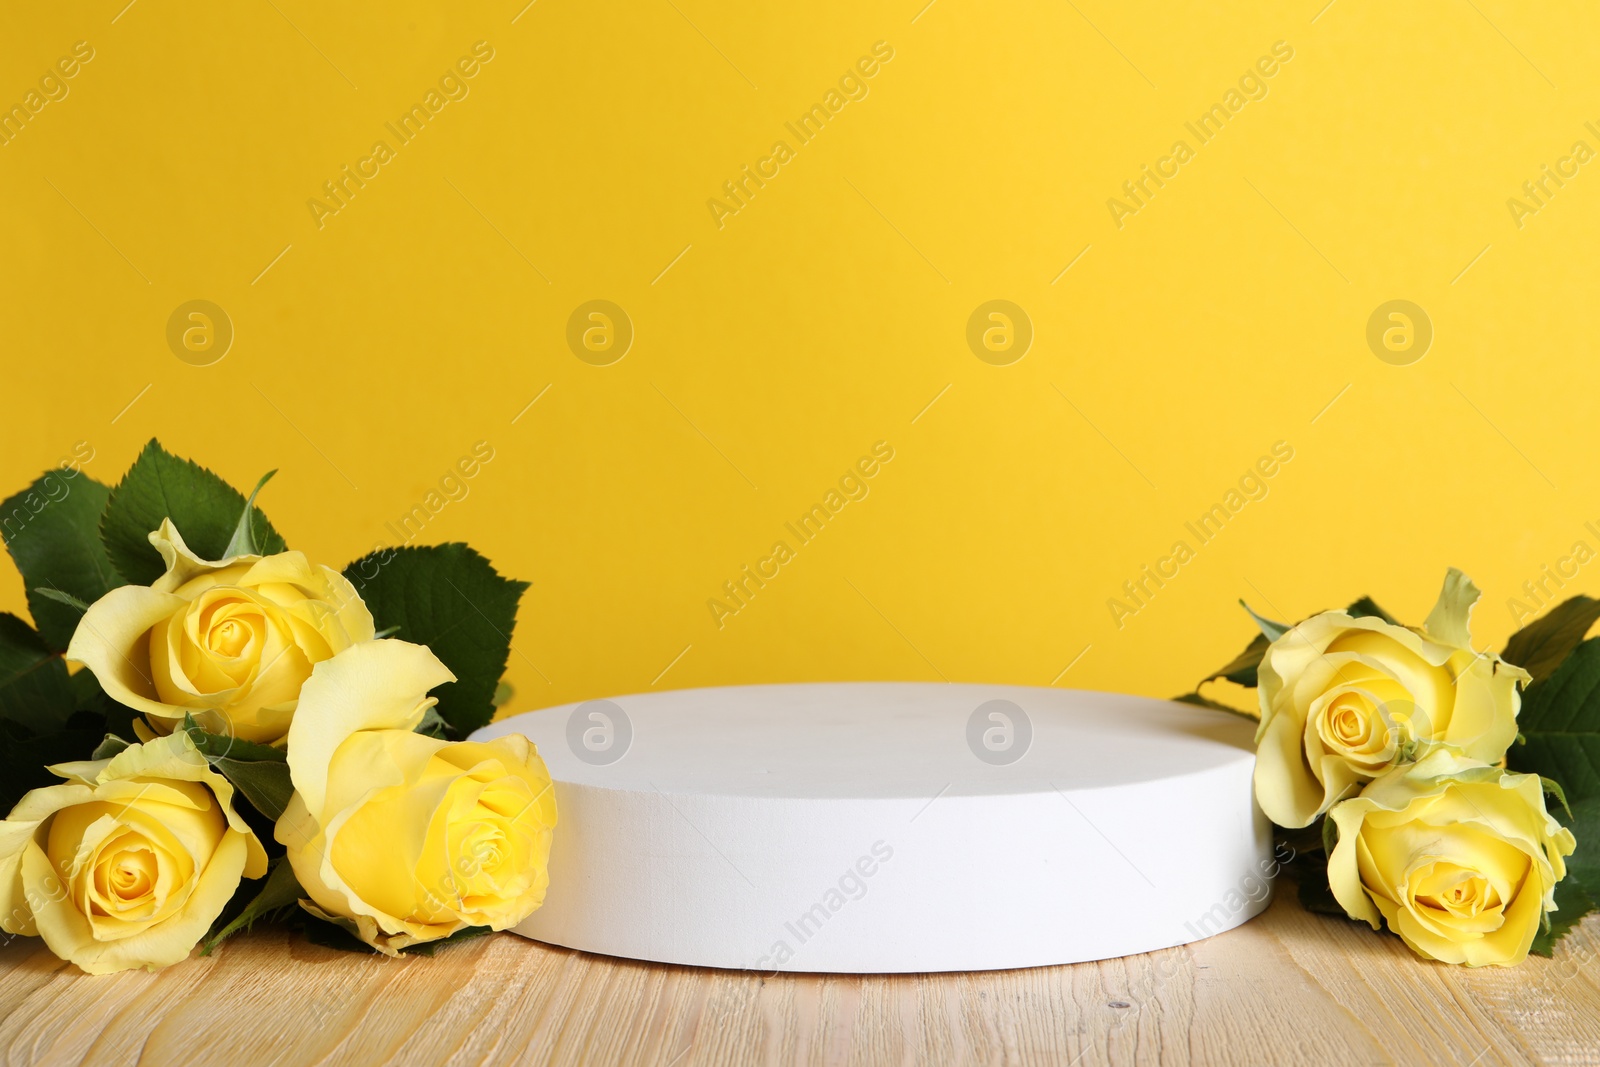 Photo of Beautiful presentation for product. White round podium and roses on wooden table against yellow background, space for text